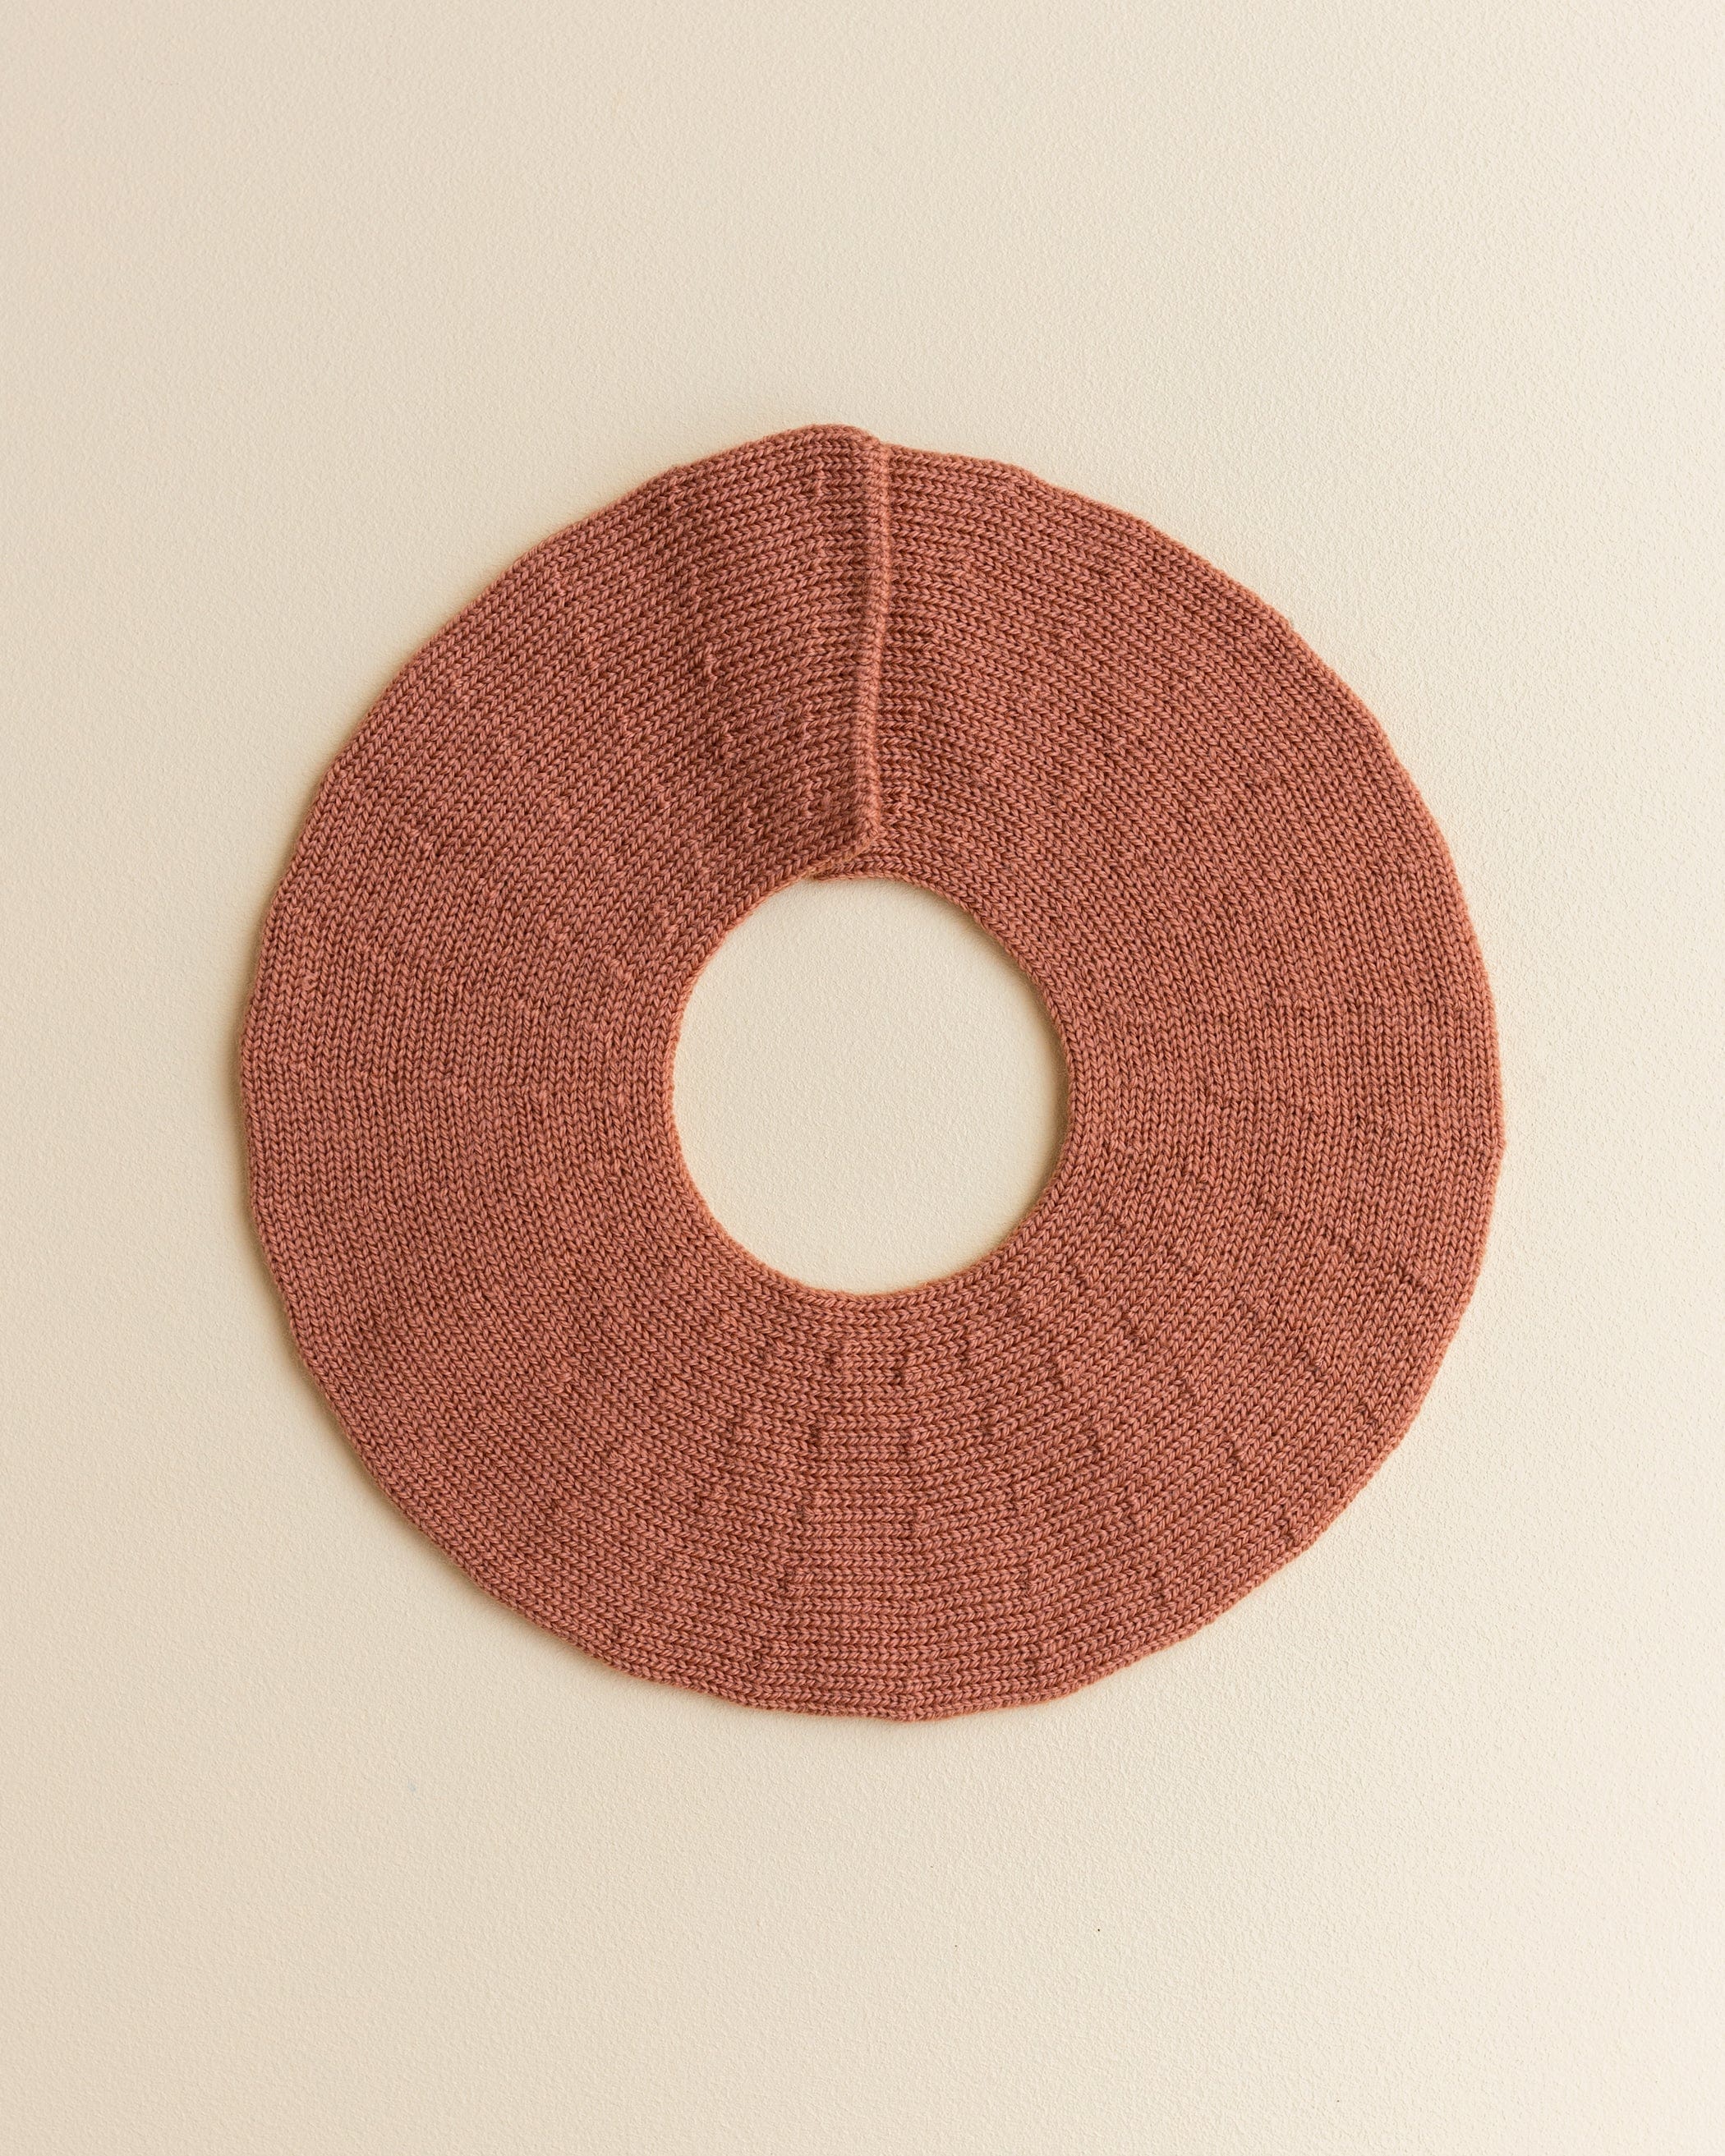 Collar merino wool for babies in winter and autumn